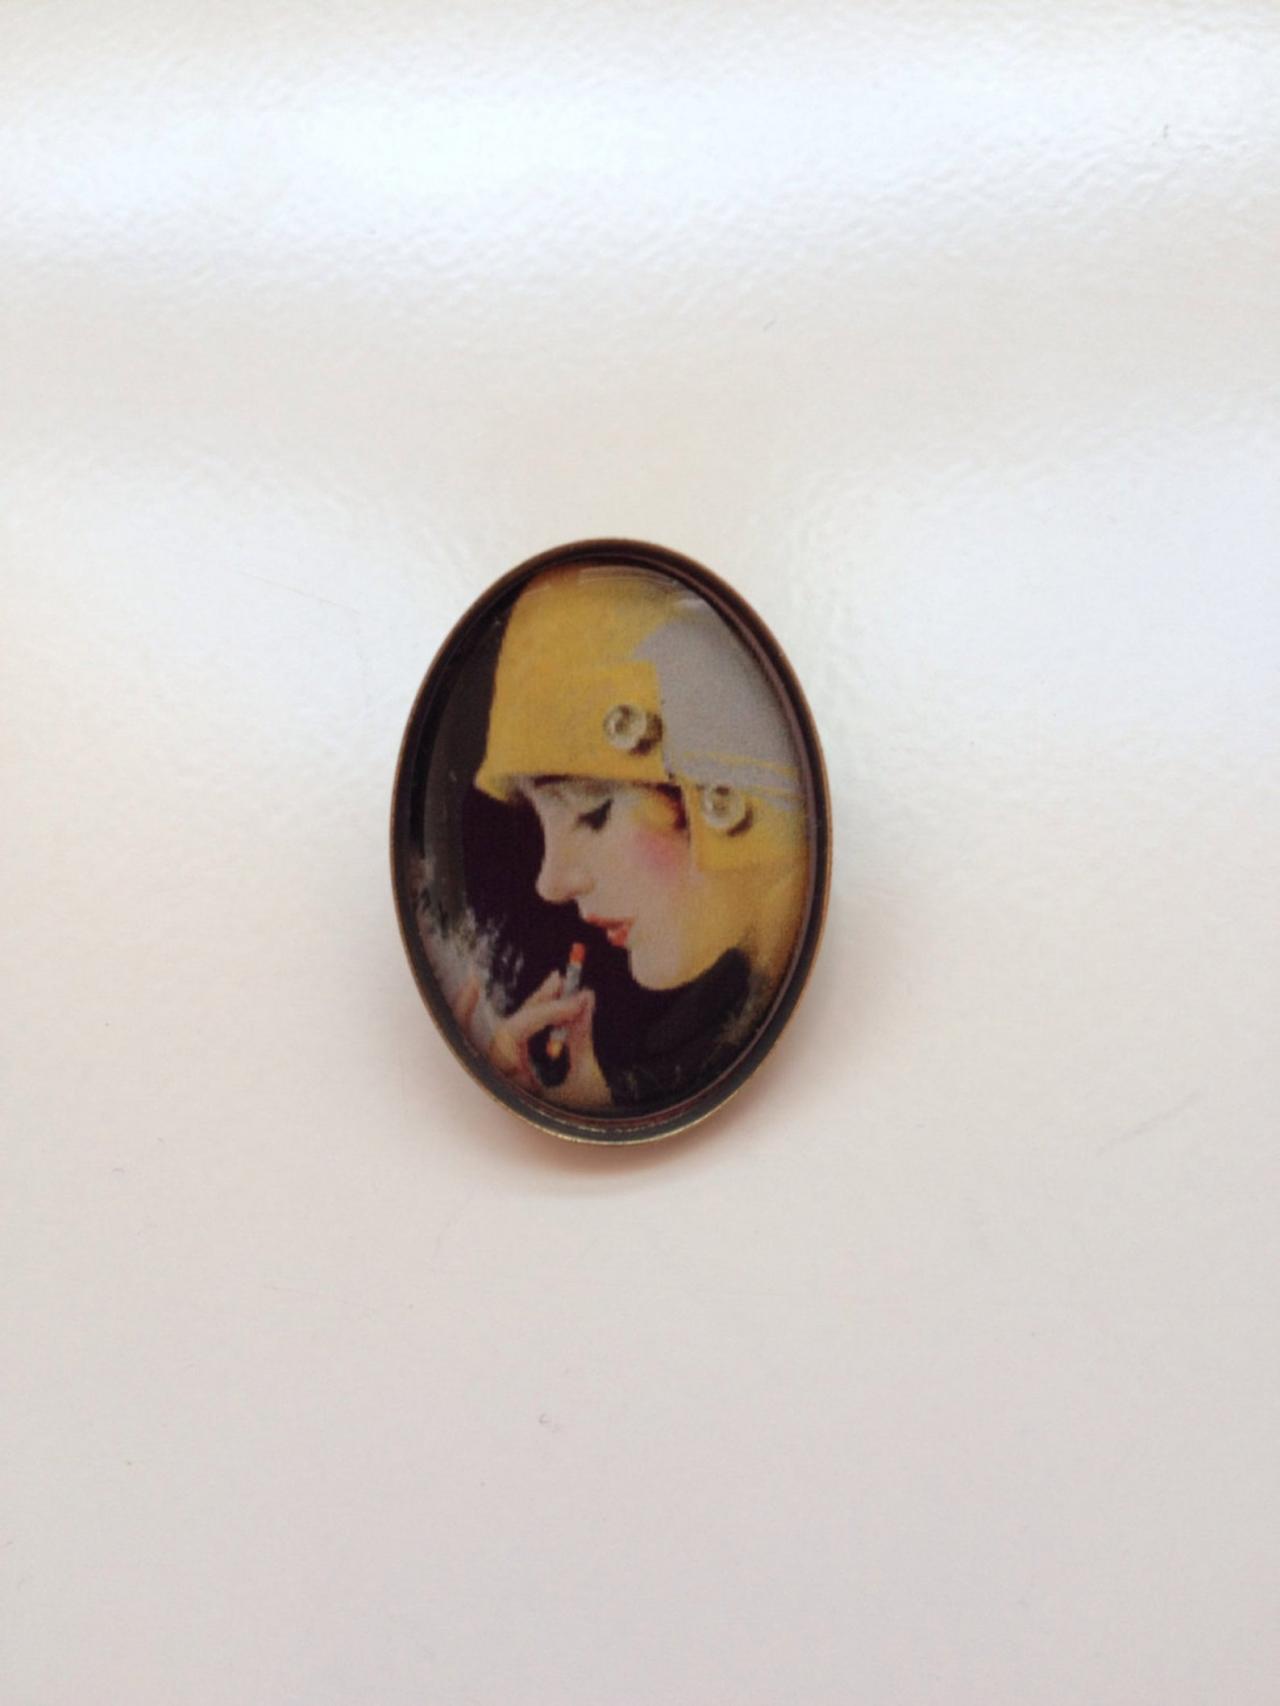 Pin 80 - Old School Pin Old Woman Image Brooch Perfect Gift Vintage Style Autumn Winter Fashion